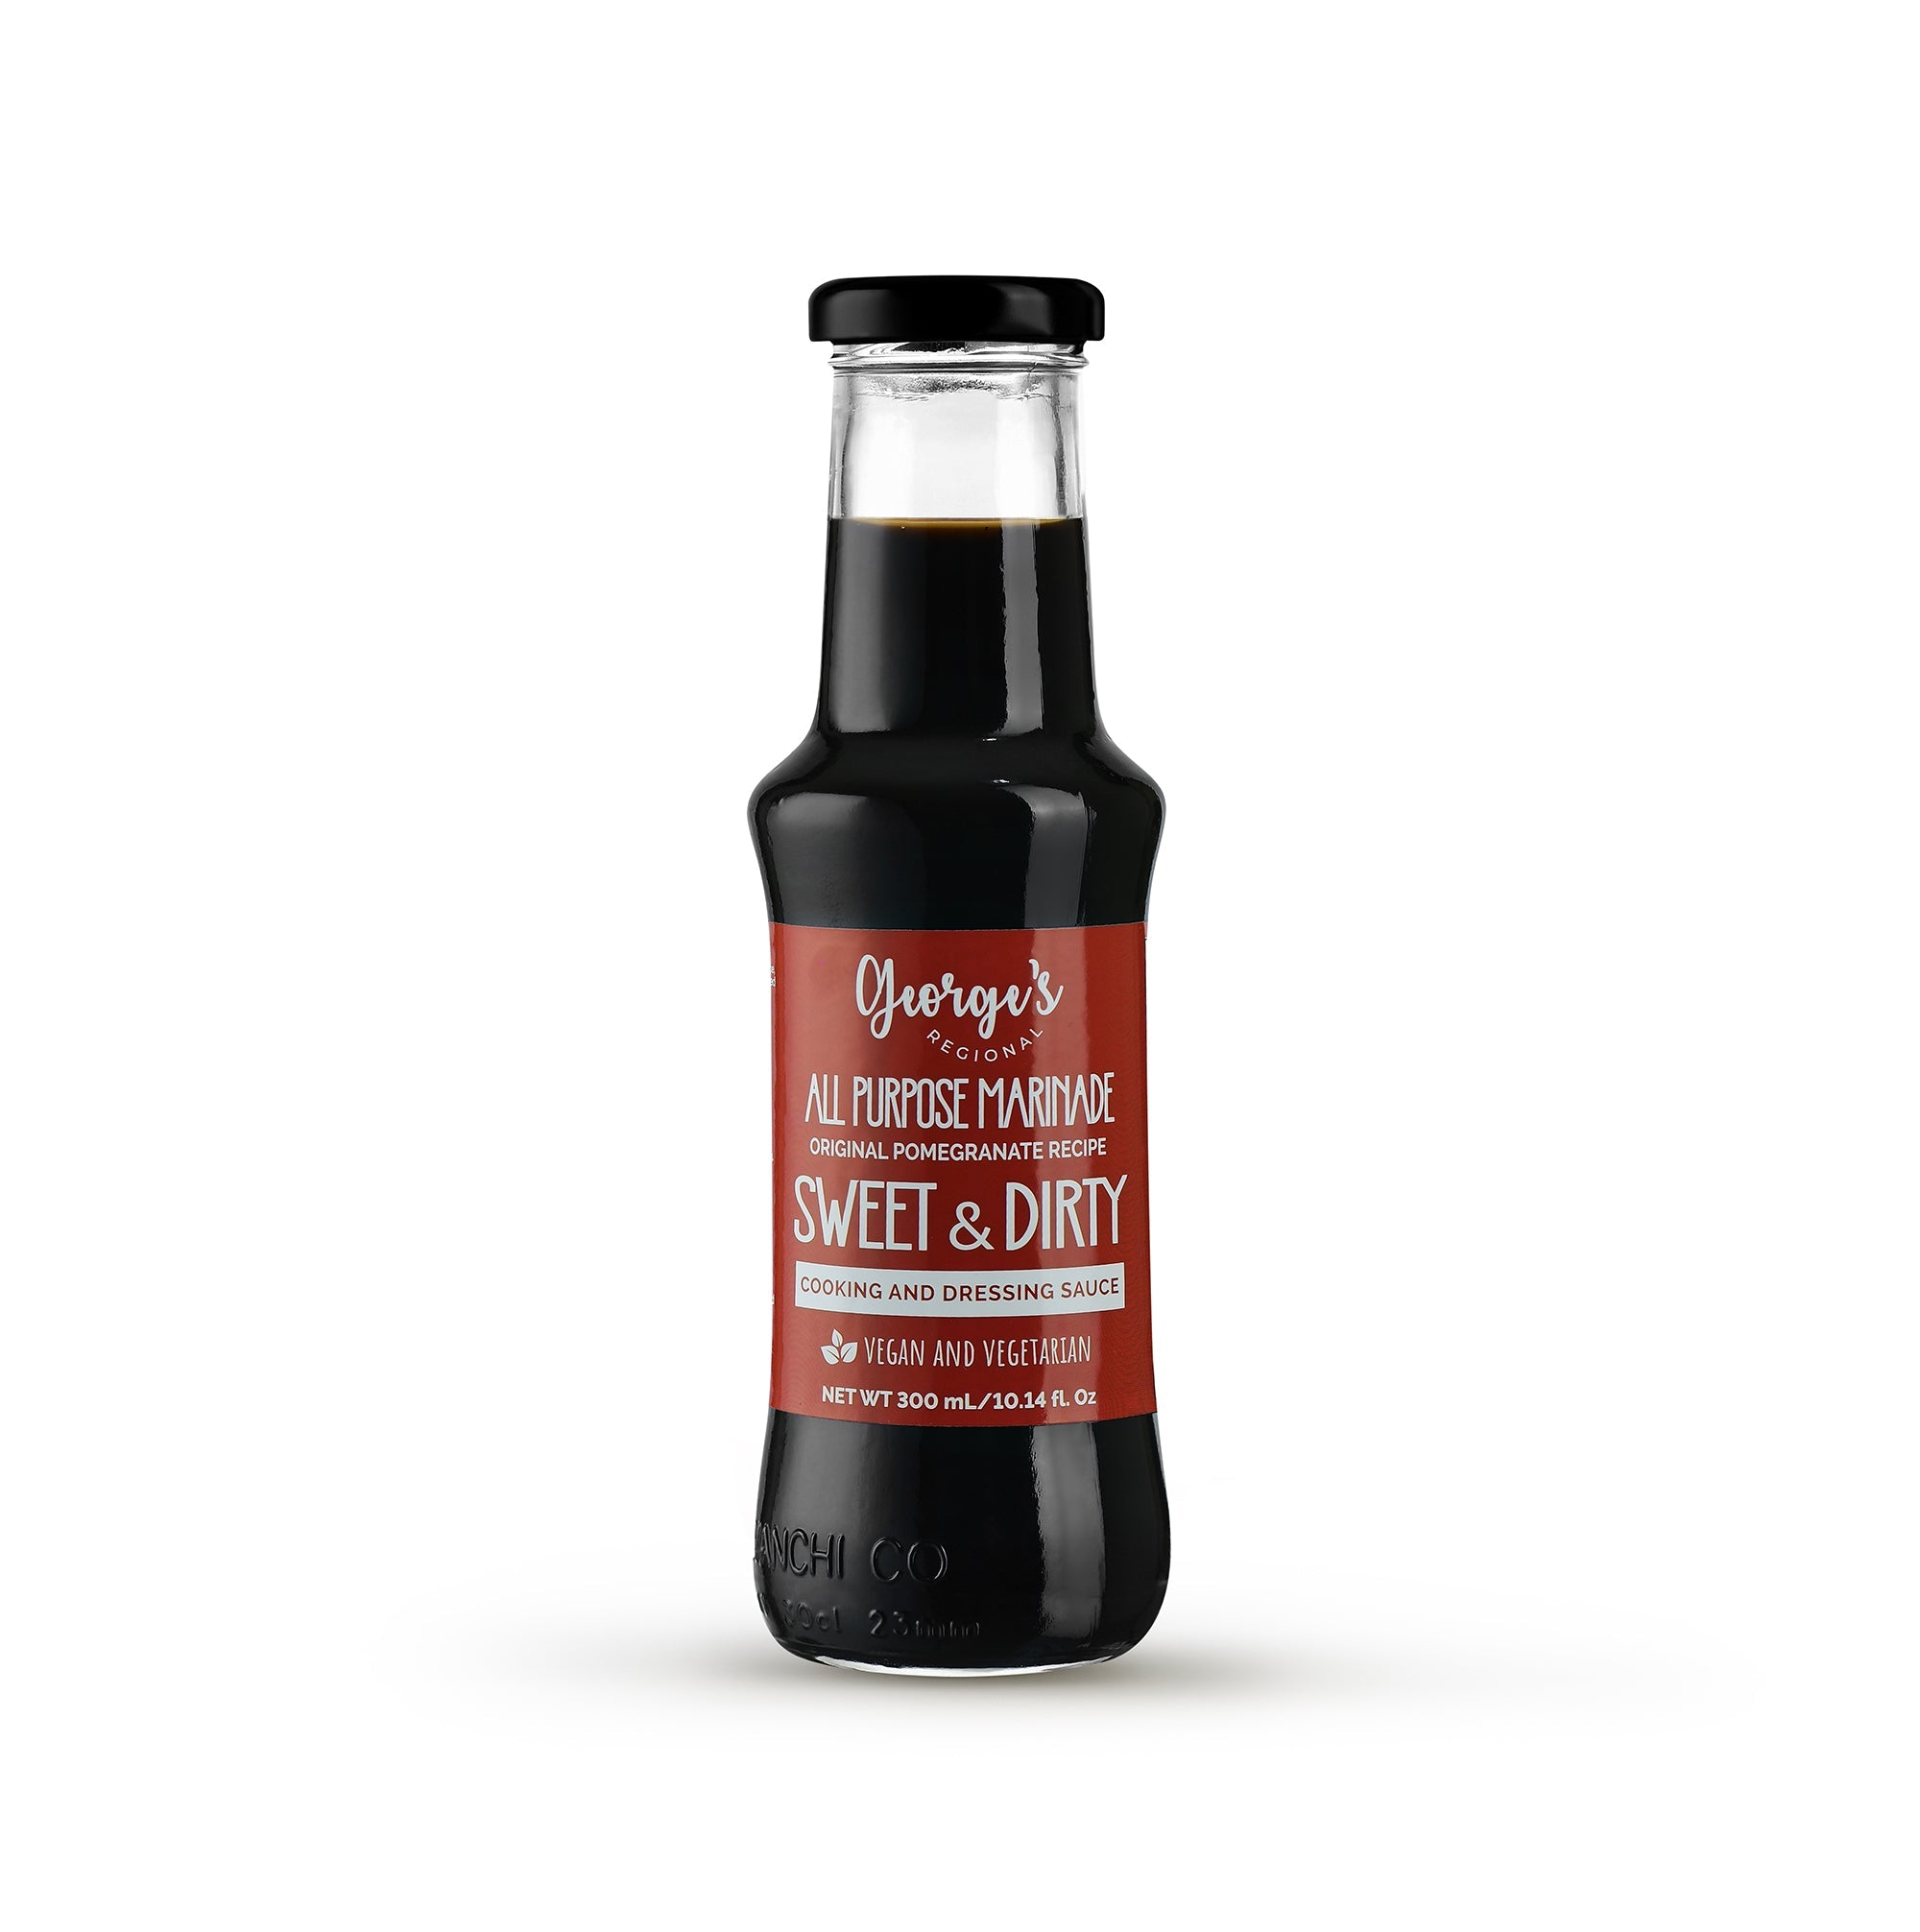 Pomegranate Molasses All Purpose Marinade and Dressing Sauce (Sweet & Dirty Flavor 300 mL/10.14 fl.Oz) - Mideast Grocers